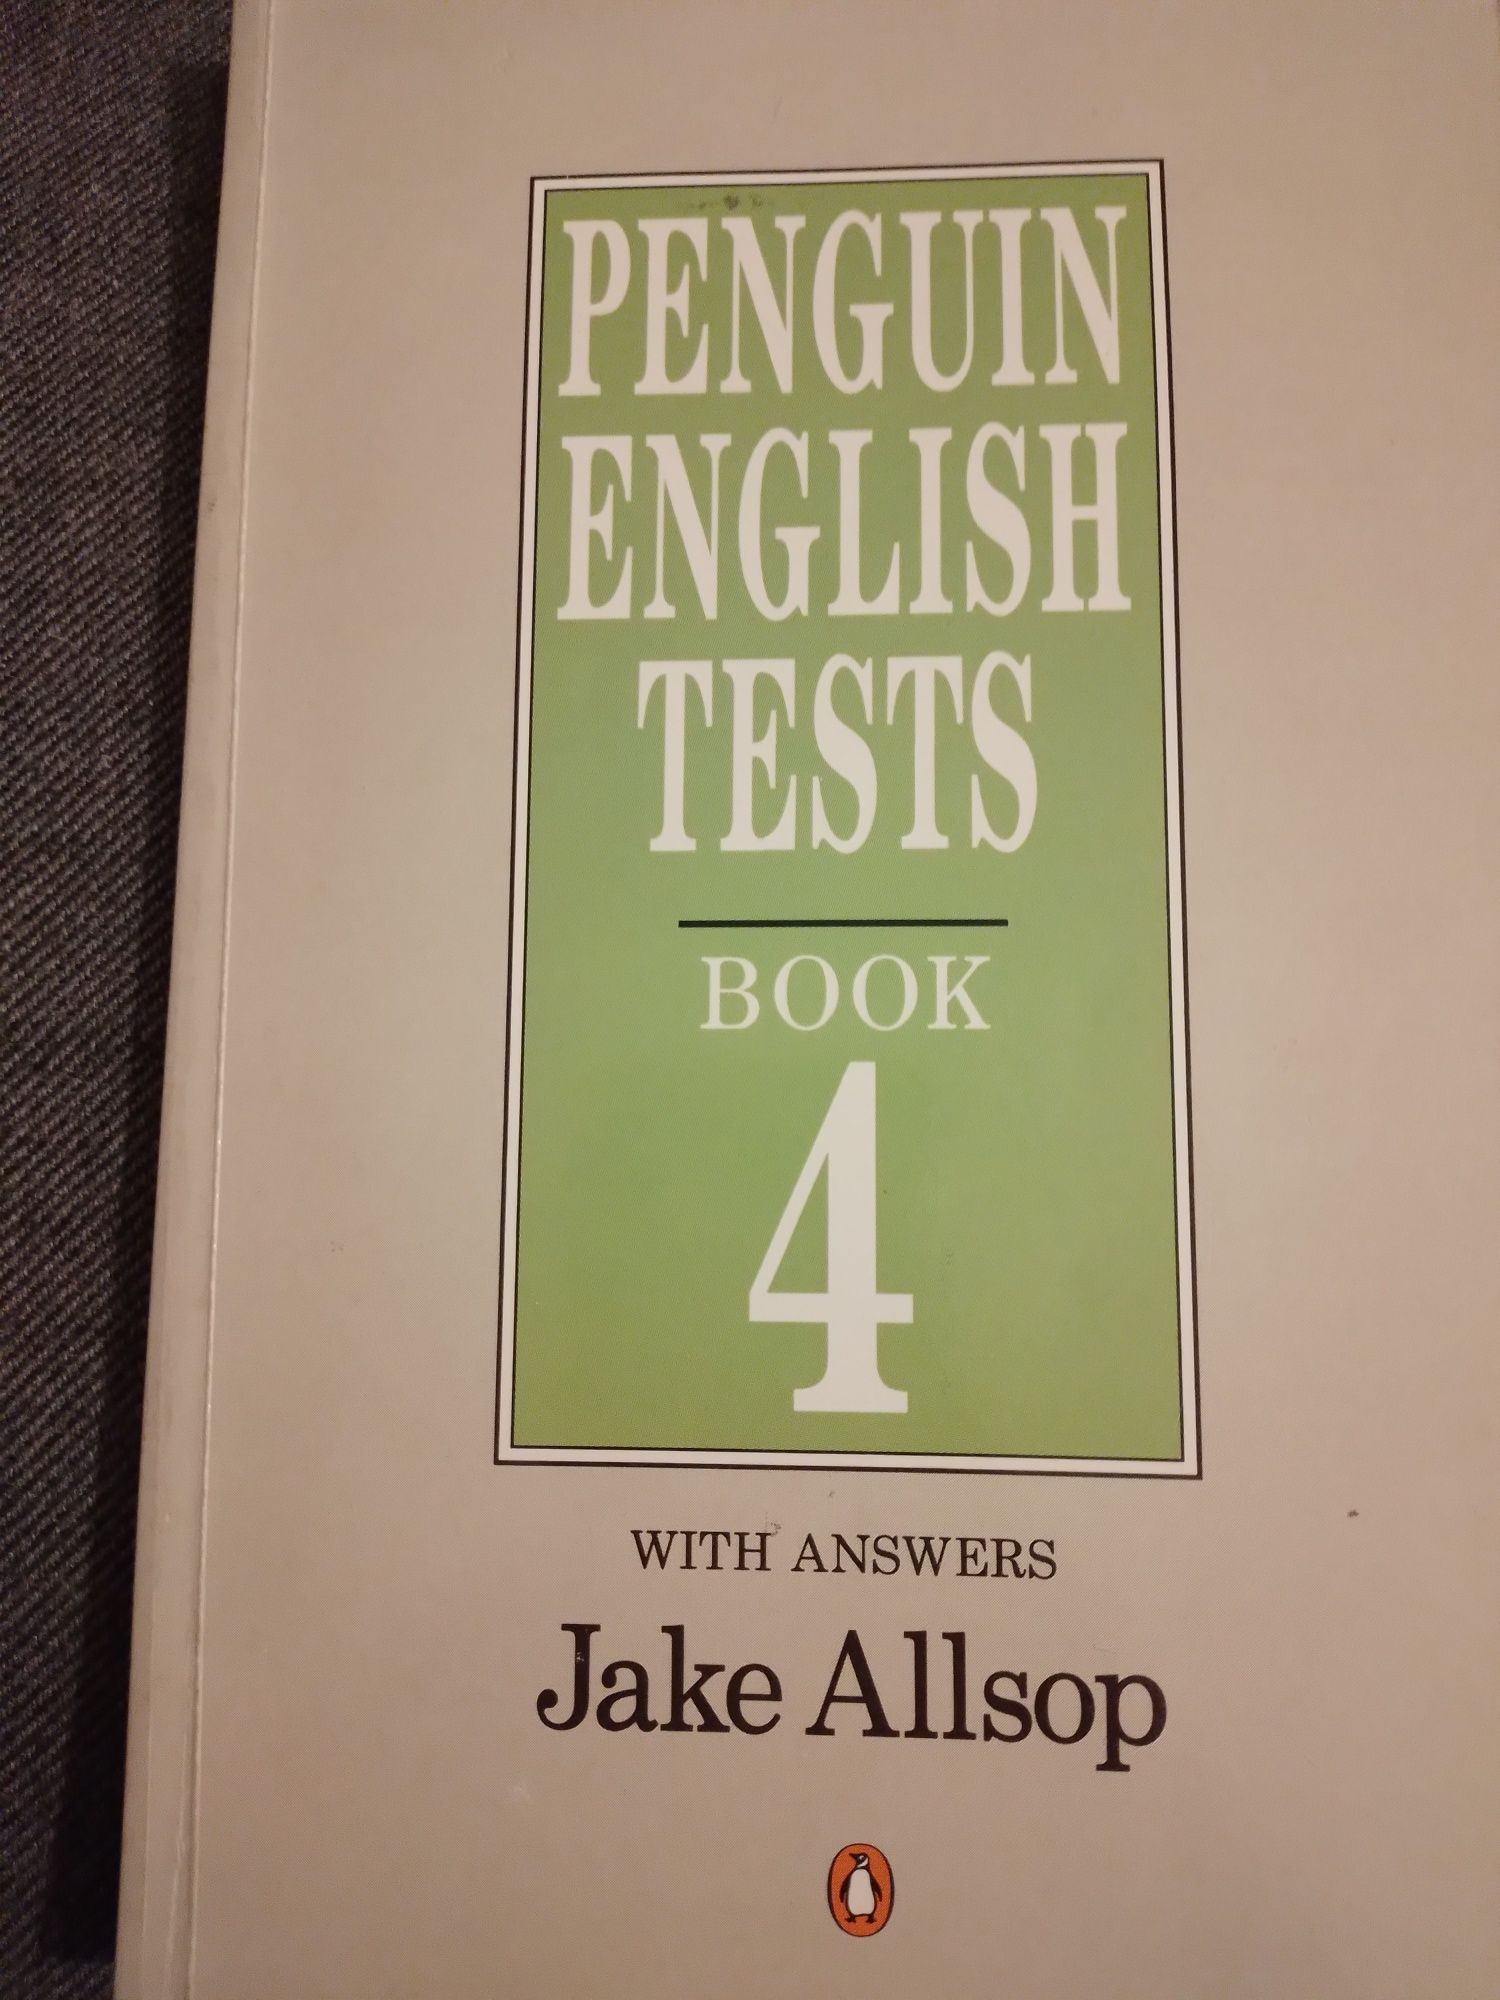 Penguin Englush Tests Book 4 with answers